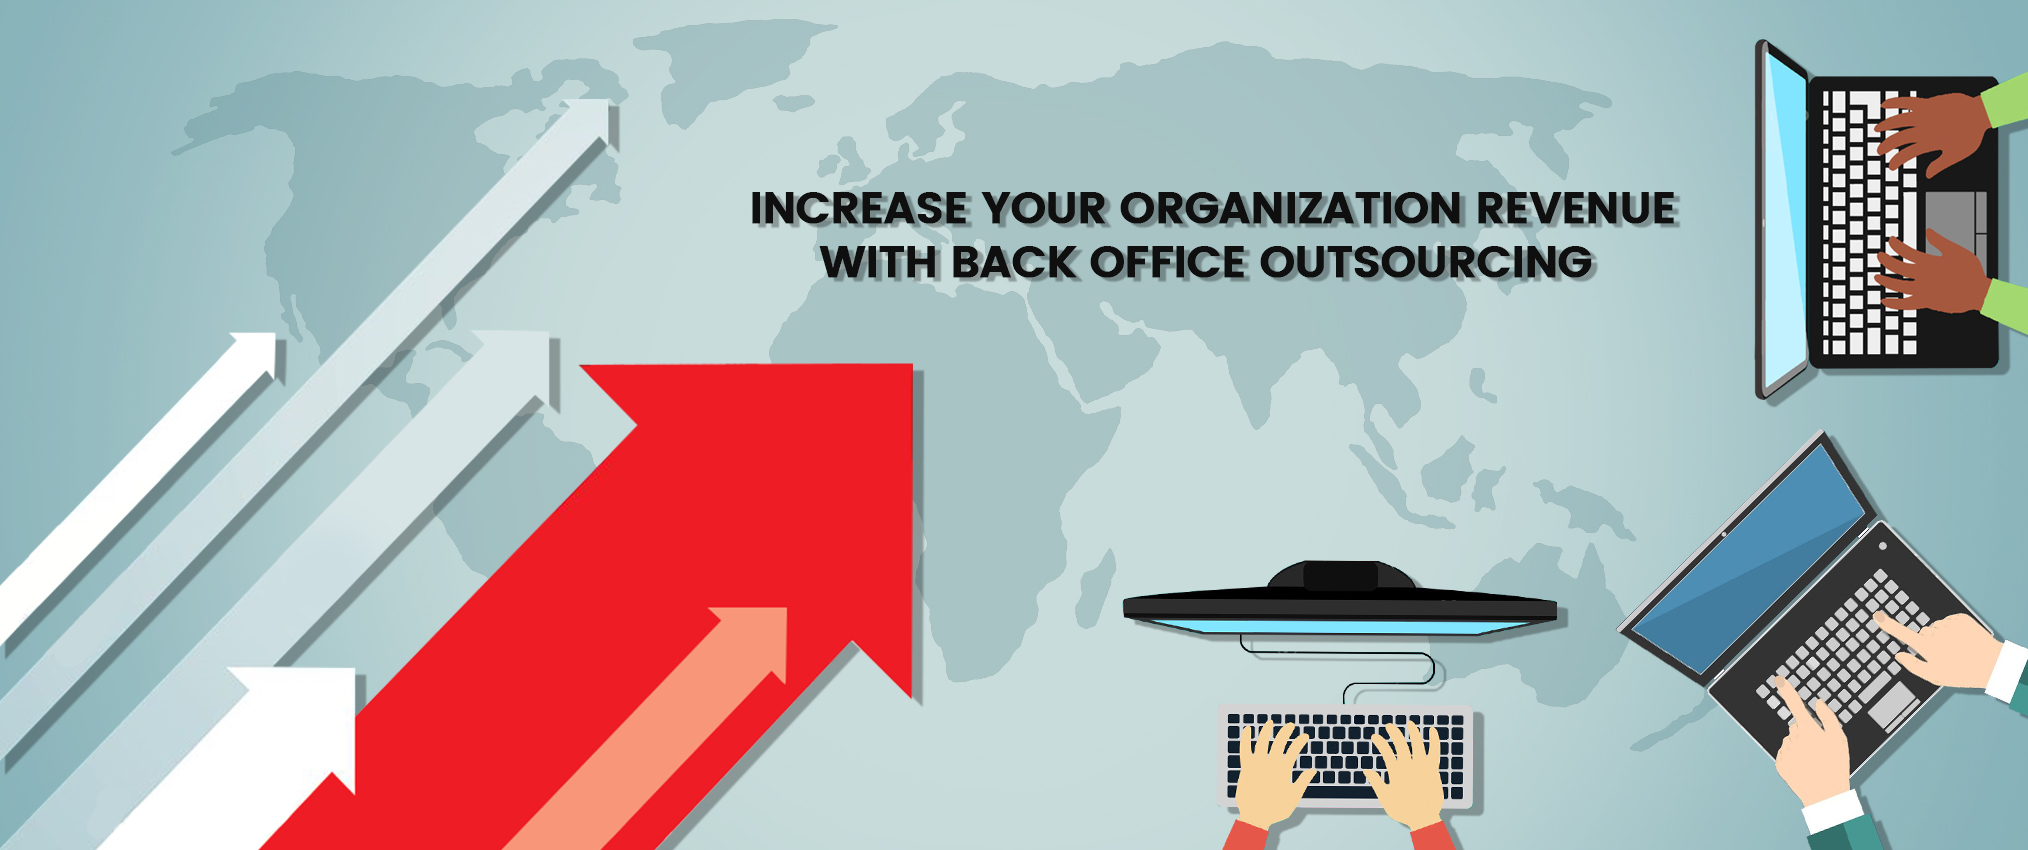 Increase your organization Revenue with Back Office Outsourcing